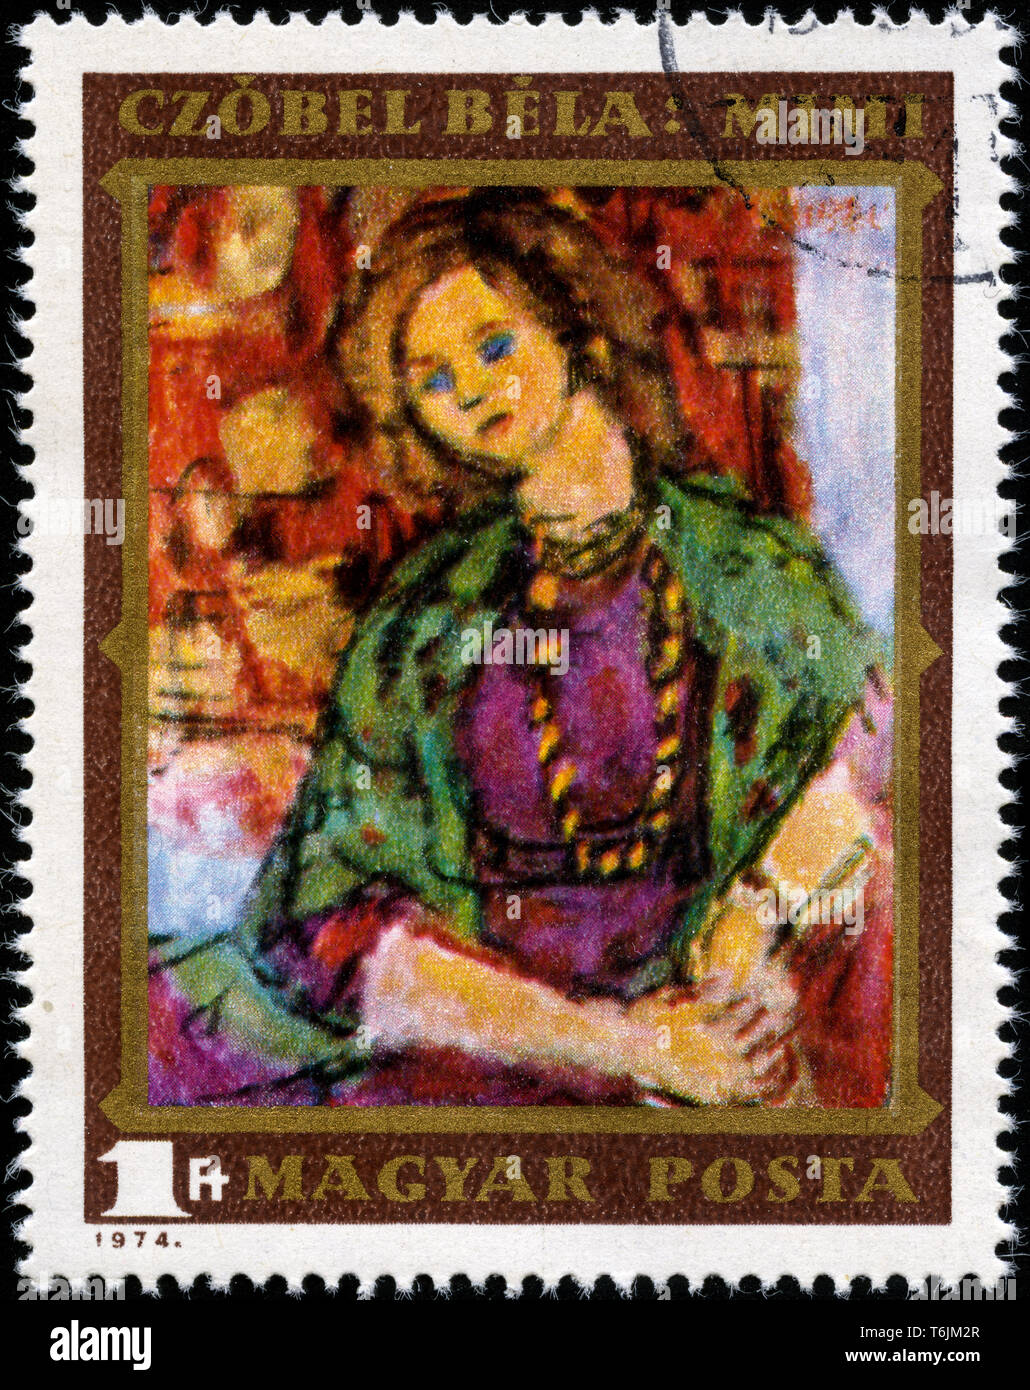 Postage stamp from Hungary in the Paintings series issued in 1974 Stock Photo